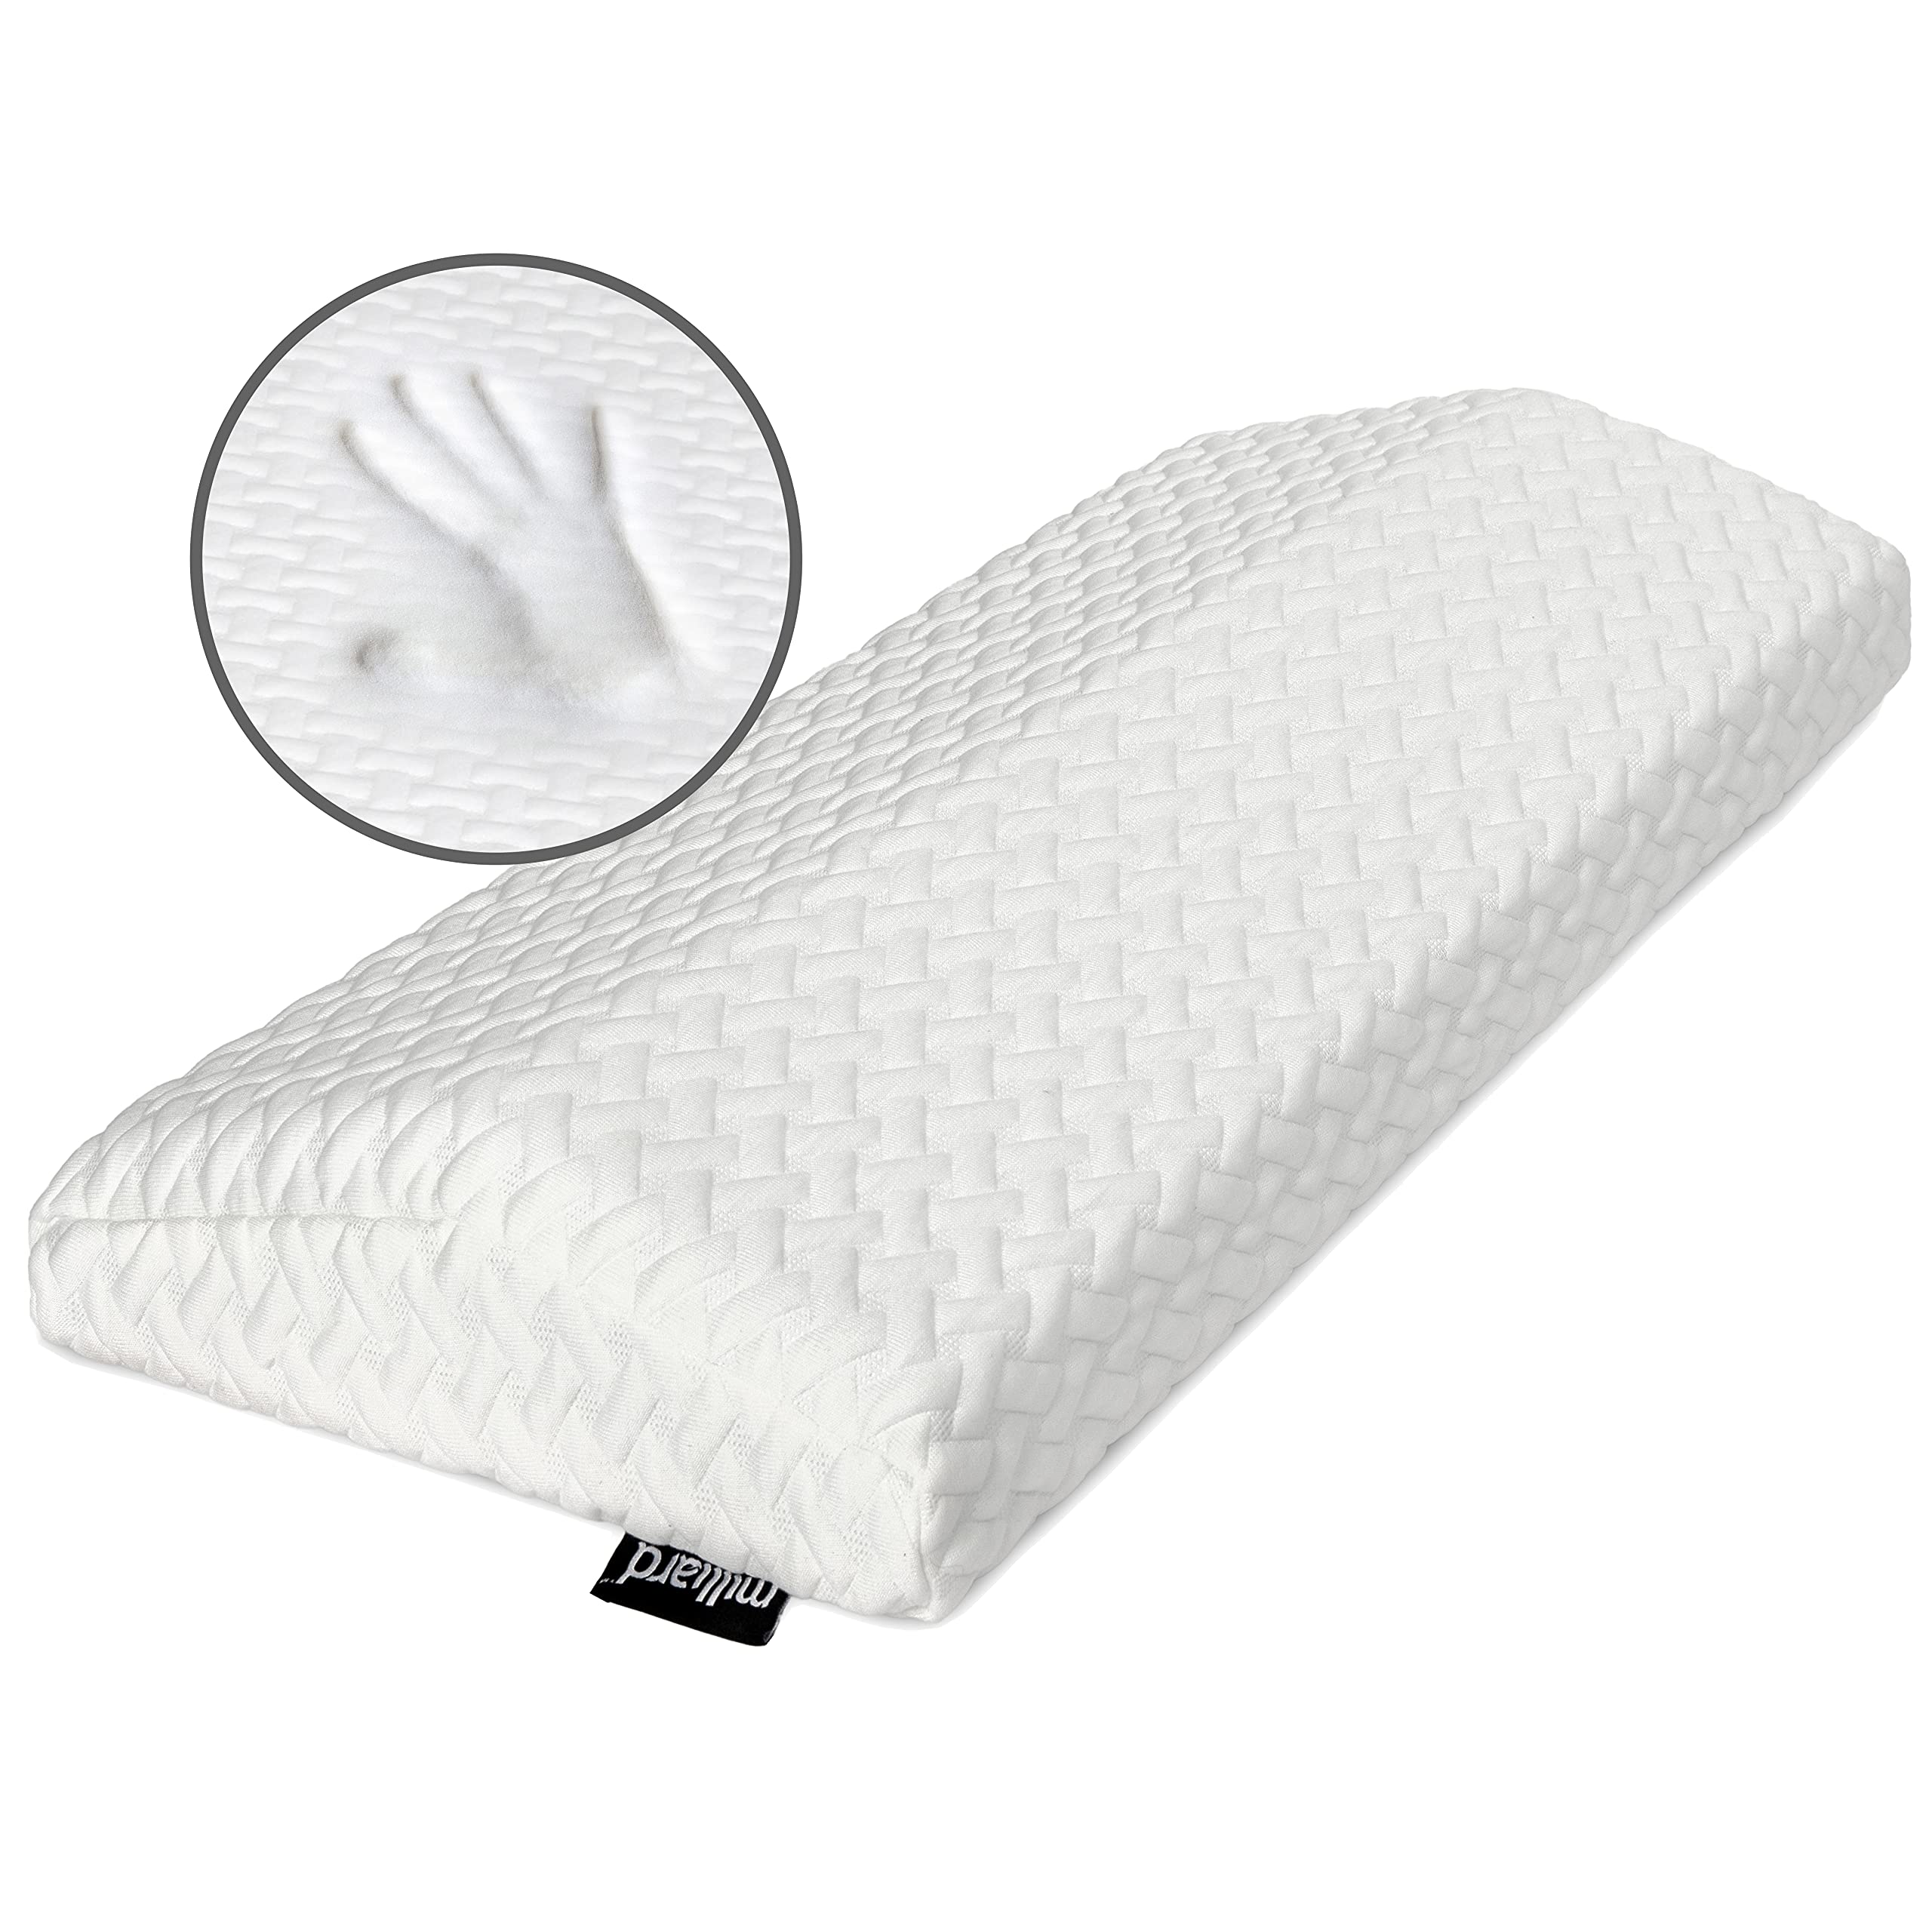 Gel Lumbar Support Pillow for Bed Relief Lower Back Pain, Cooling Memory  Foam Pillow for Sleeping, Waist Sleep Cushion for Side, Back Sleepers,  Wedge